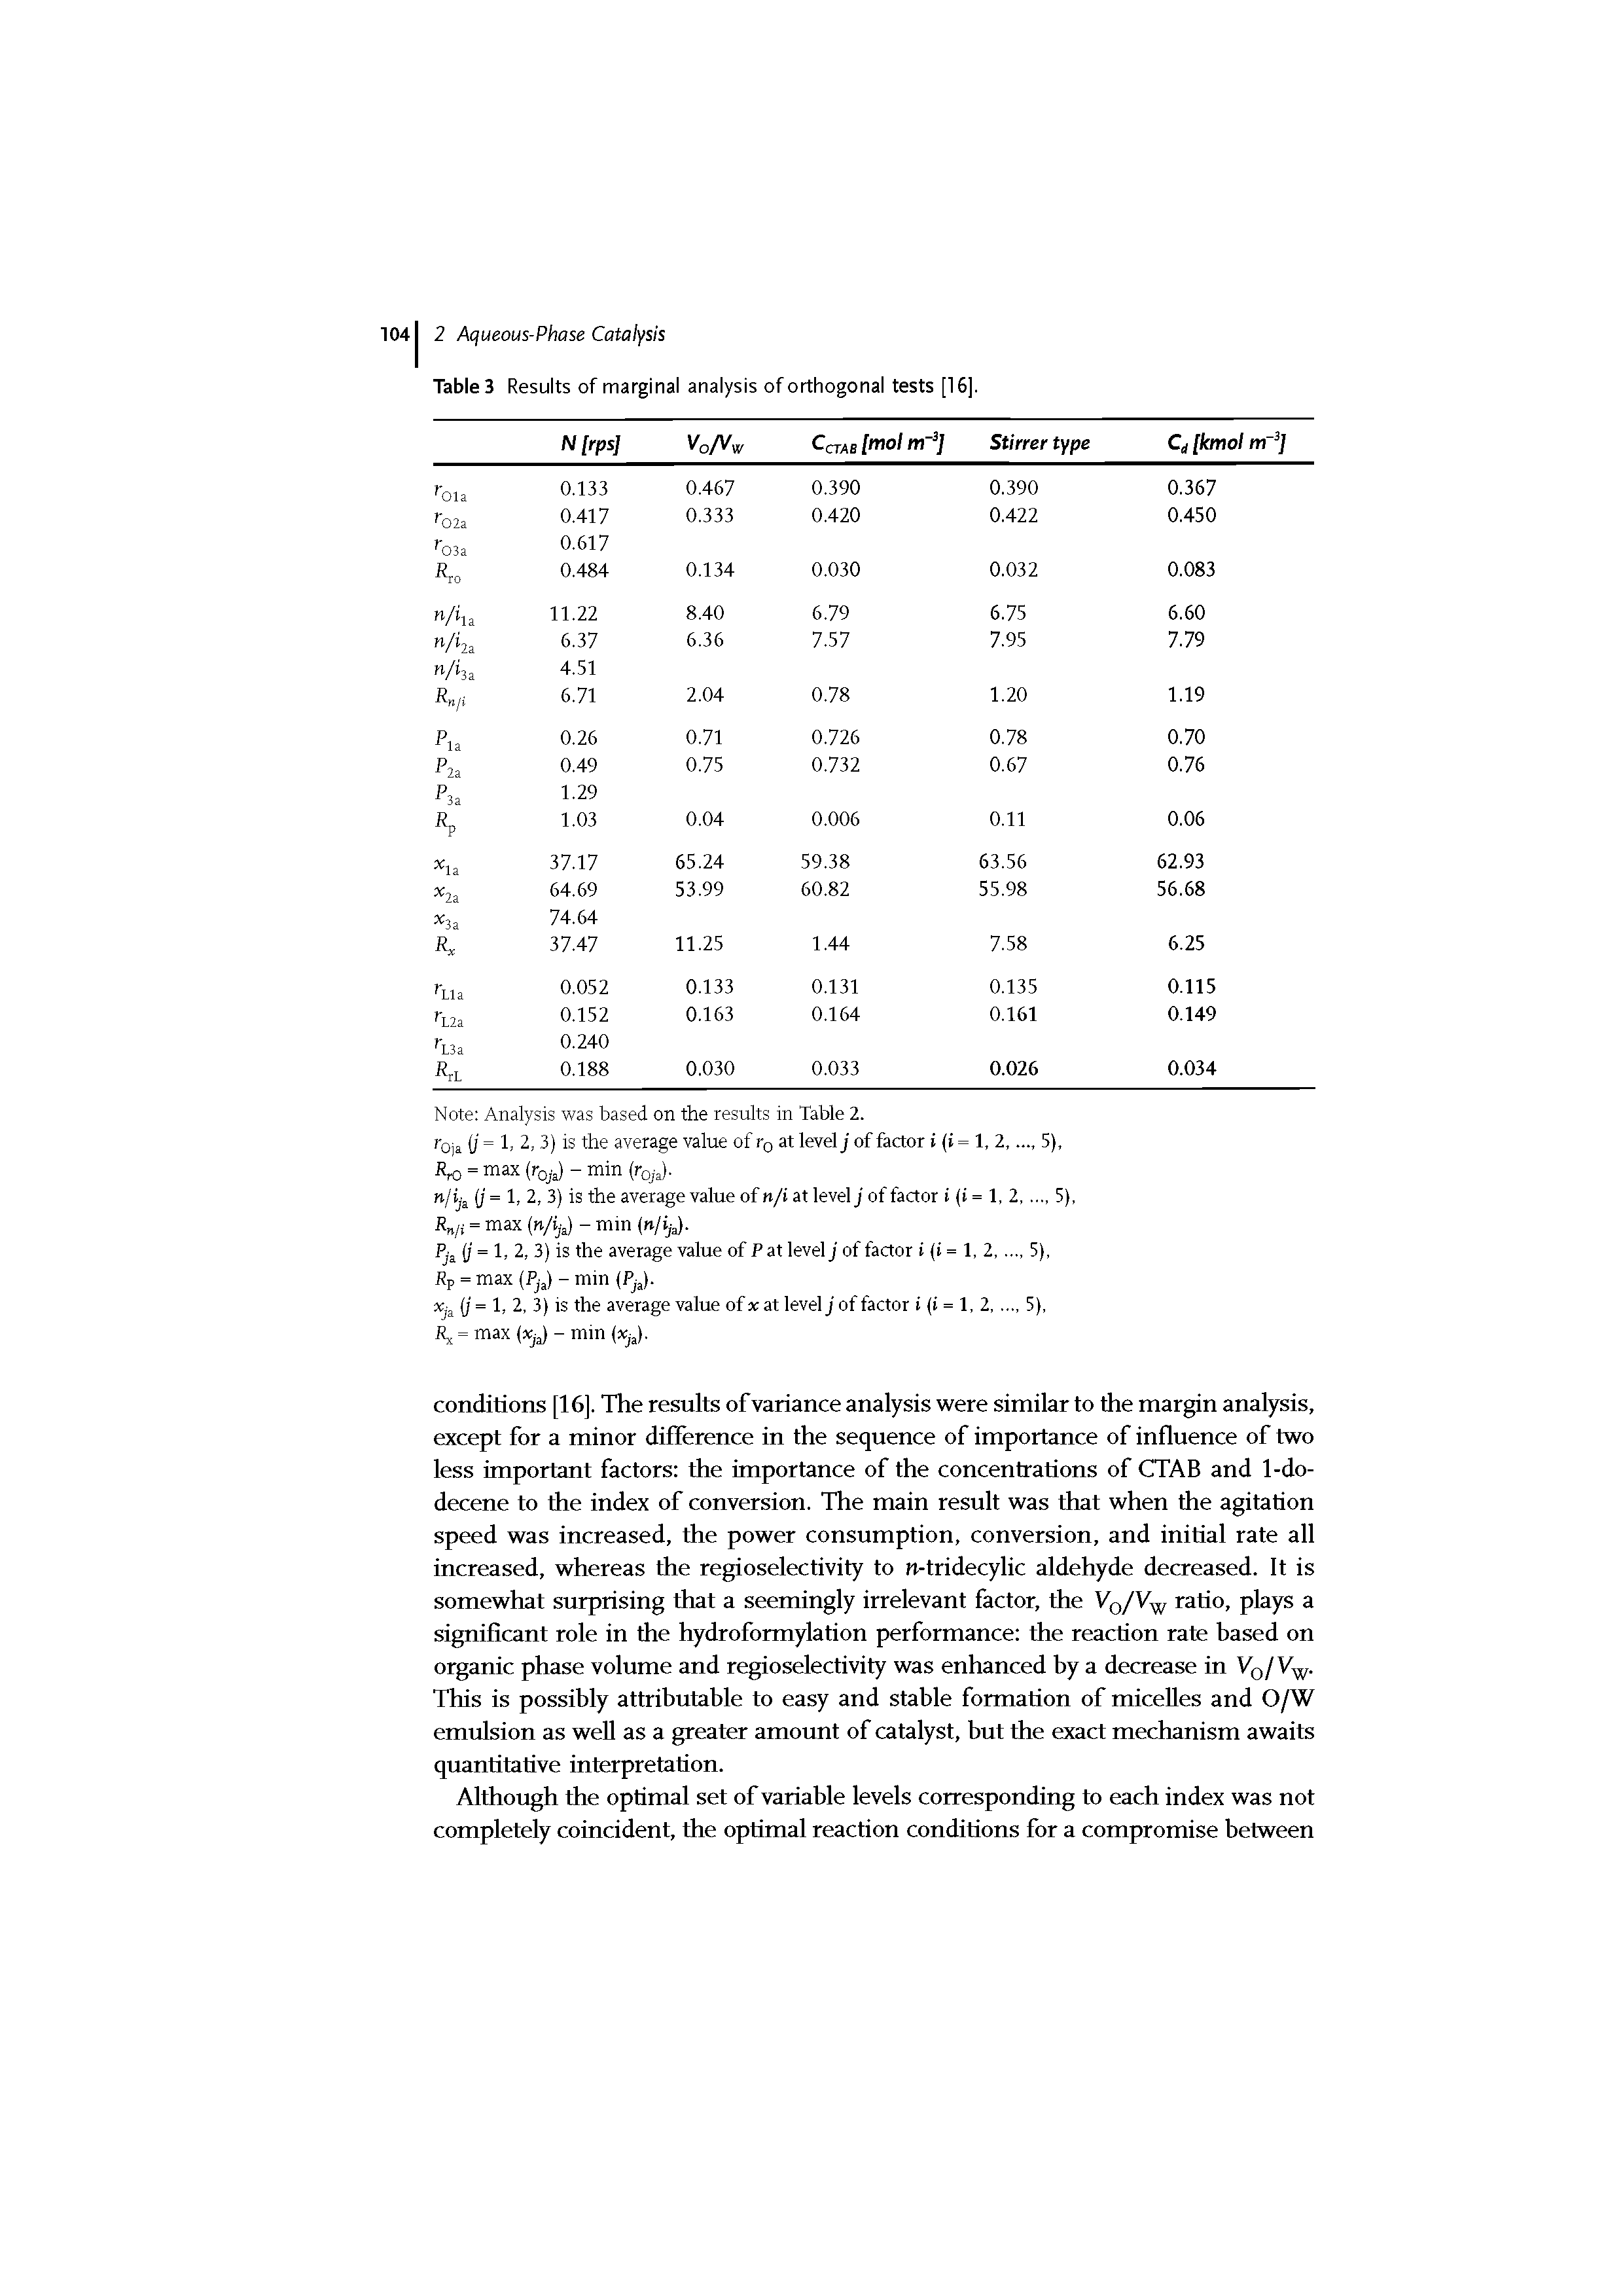 Tables Results of marginal analysis of orthogonal tests [16].